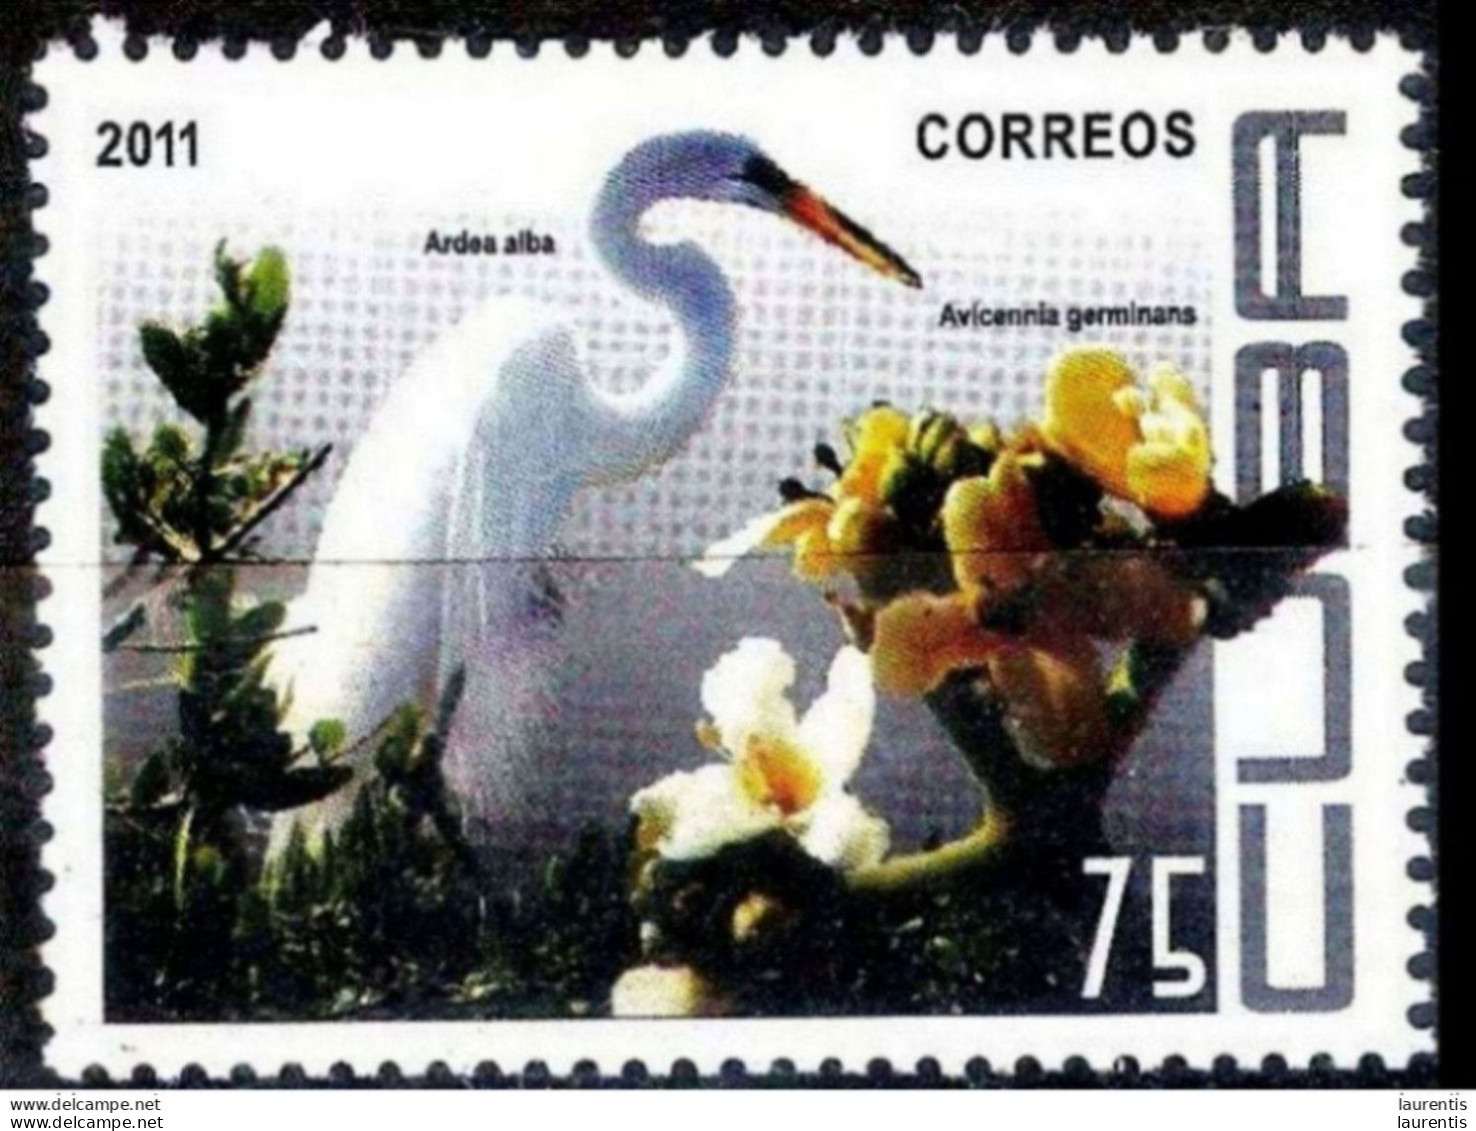 14651  Cranes - Grues - No Other Crane In The Stamp Set - 2011 - MNH - Cb -  1,50 - Aves Gruiformes (Grullas)